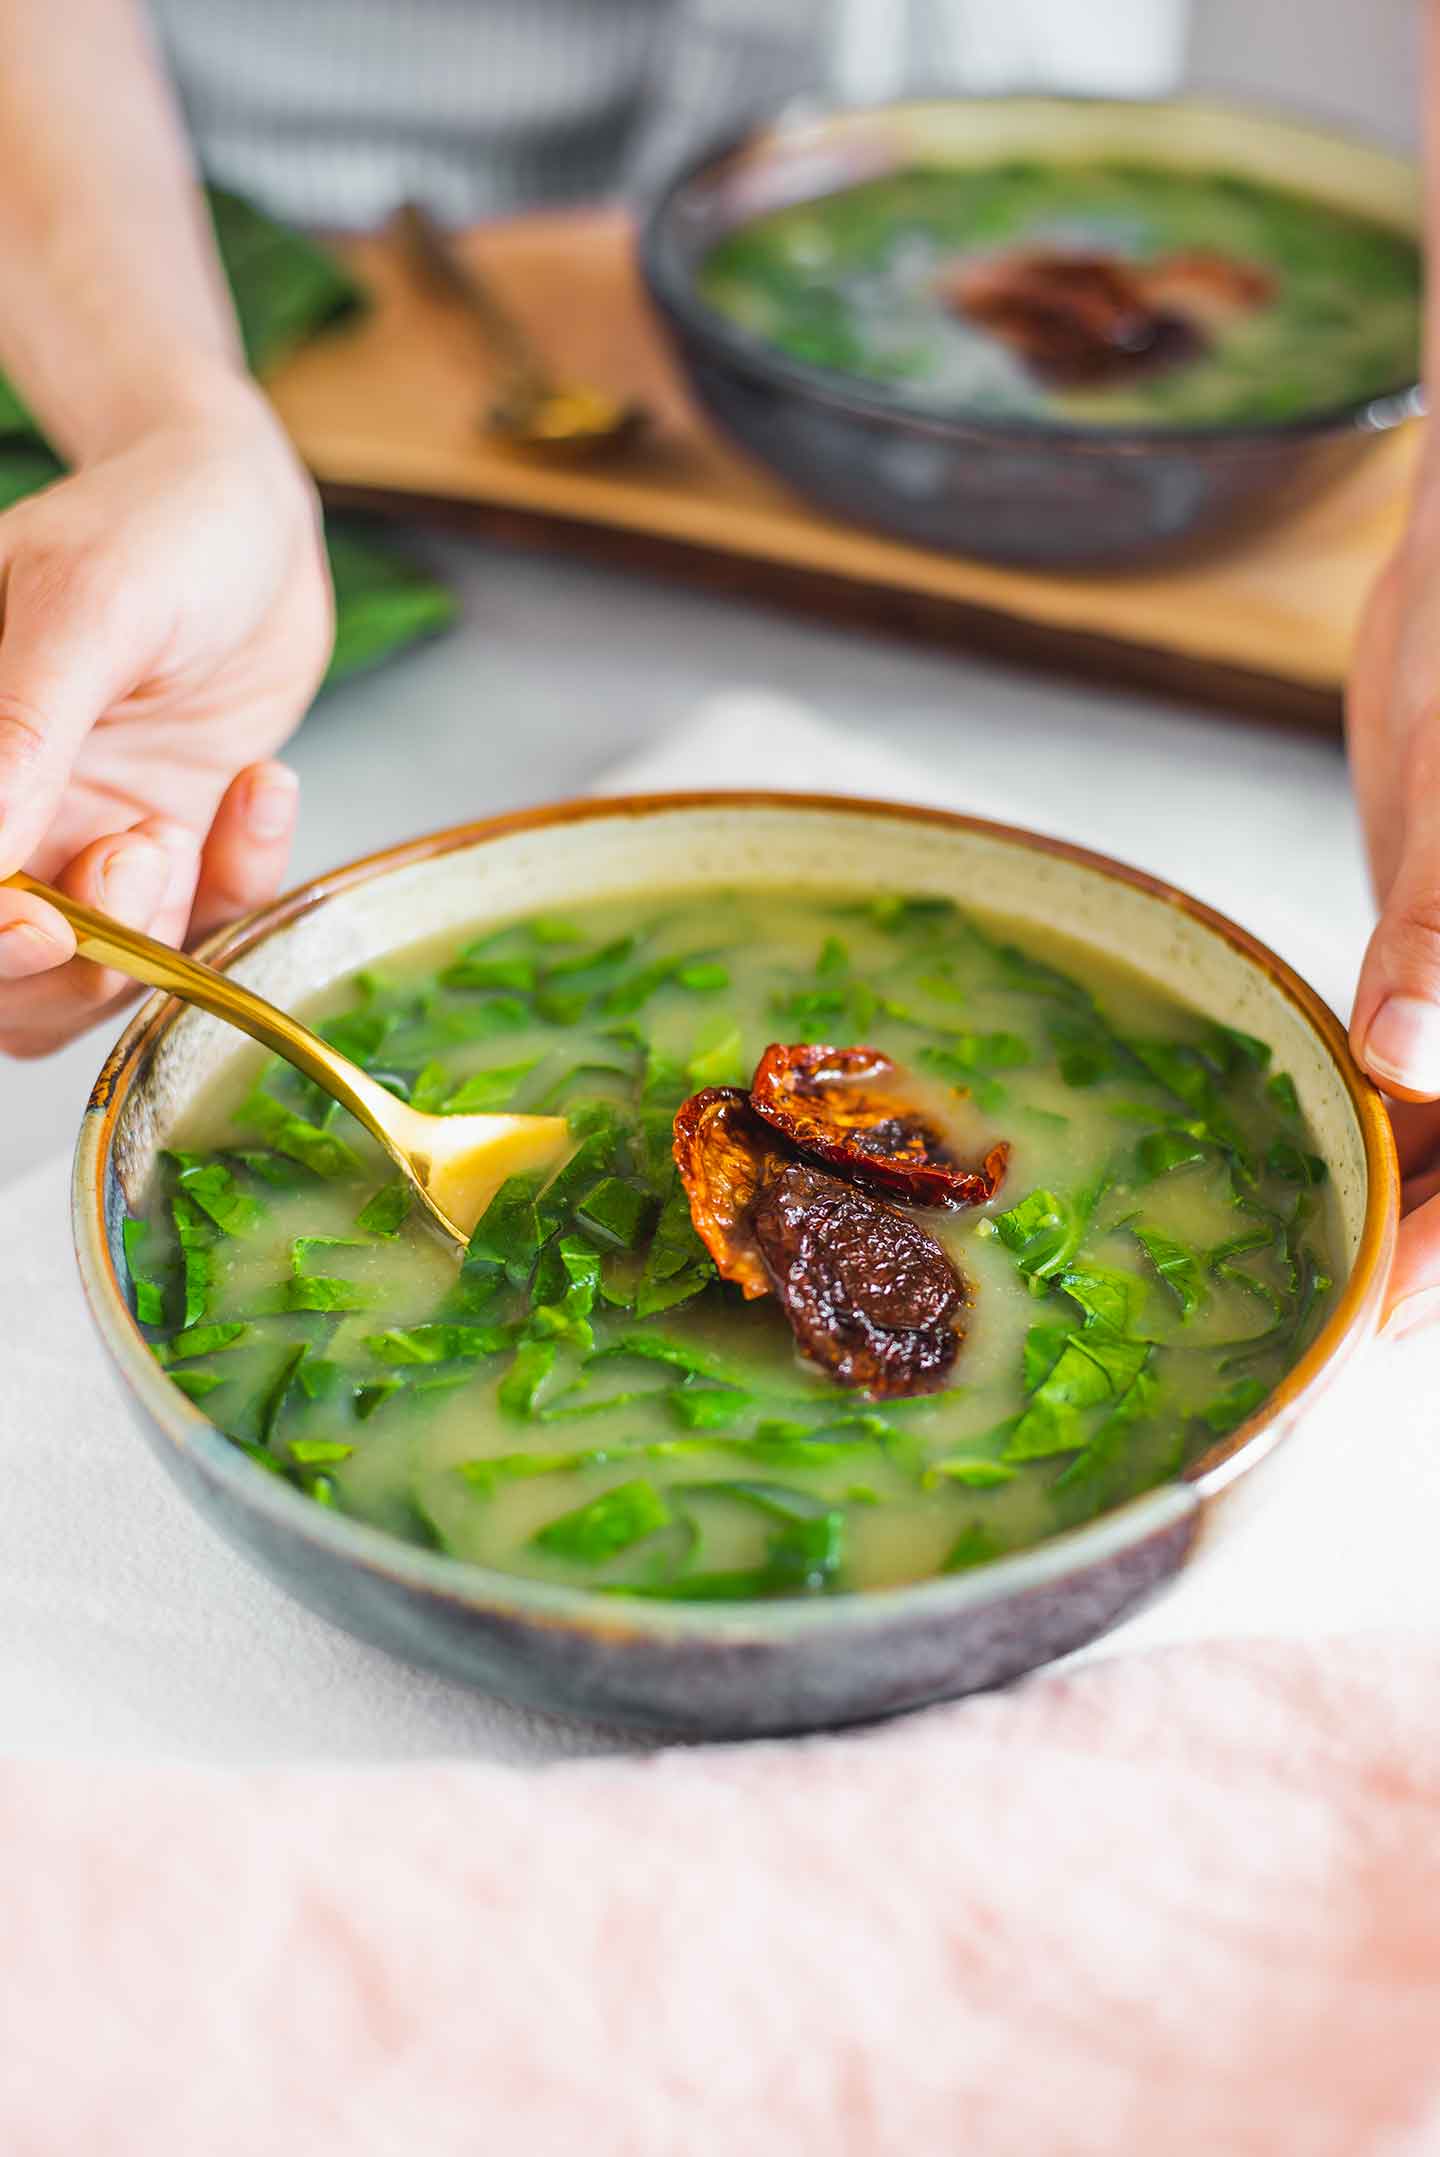 Side view of a hand holding a spoon and dipping it into the caldo verde. Another bowl is in the background and both are topped with a few pieces of smoky sun-dried tomato.